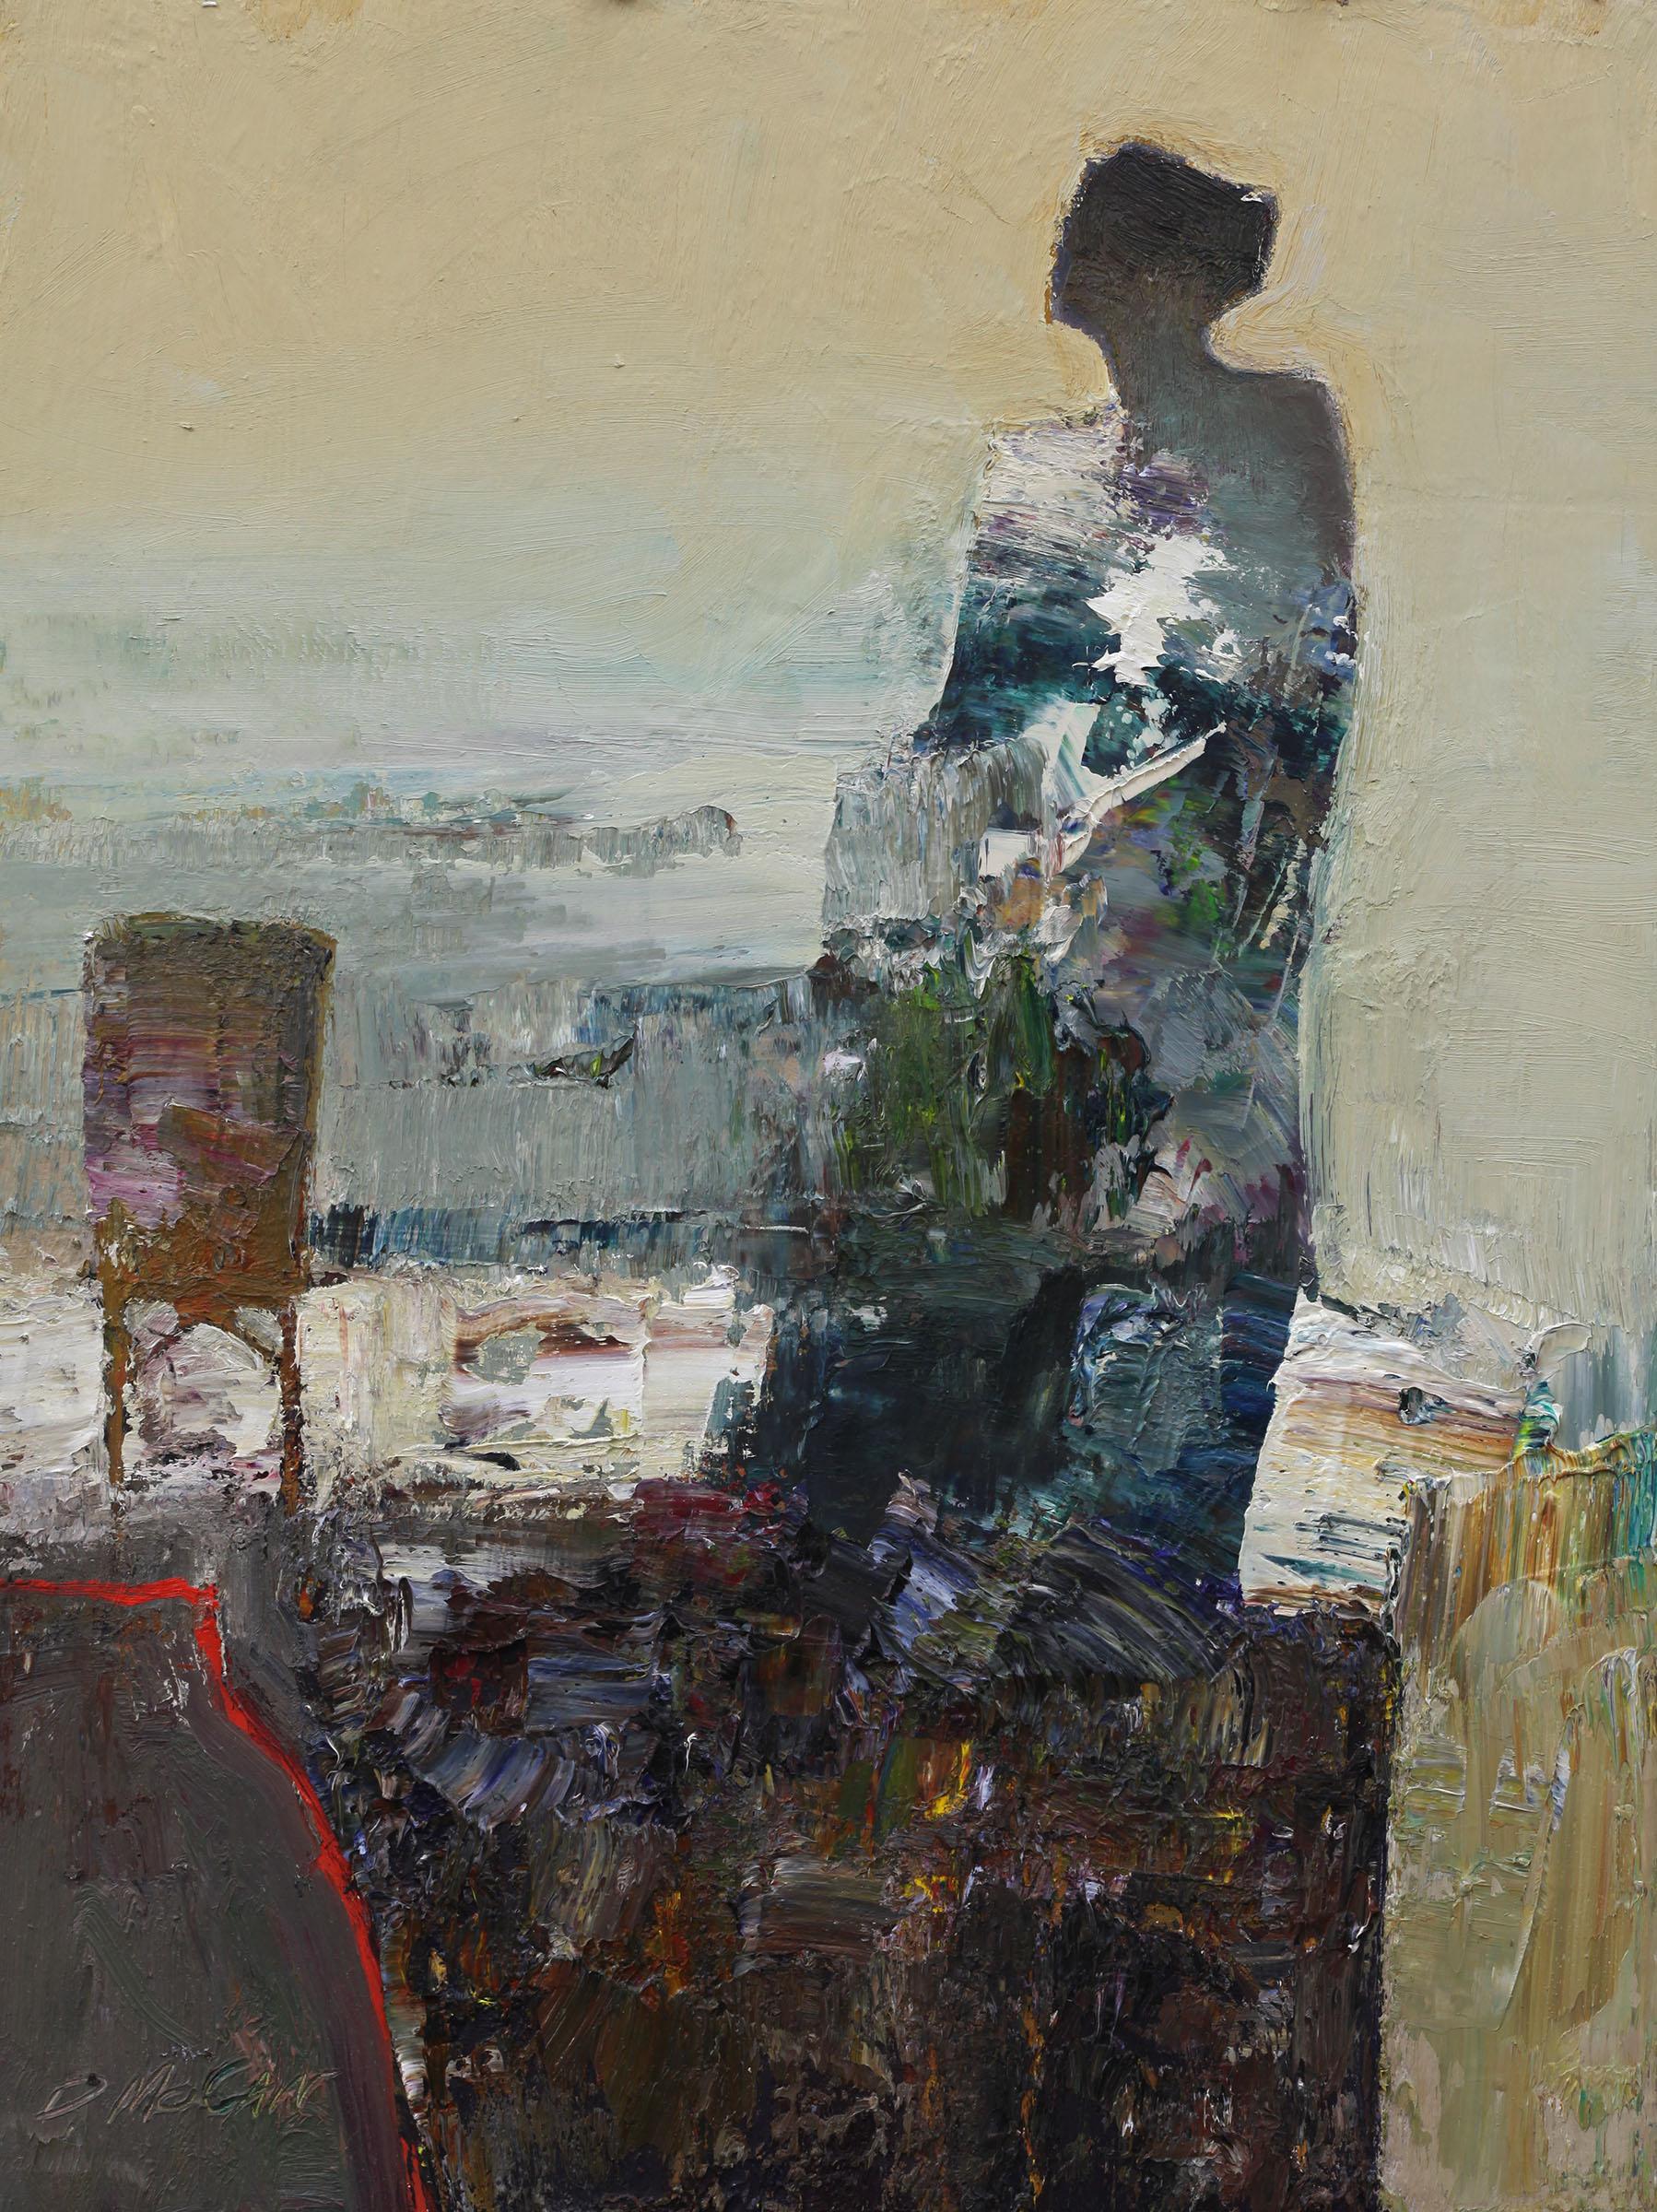 Dan McCaw Figurative Painting - "Textures" Oil Painting